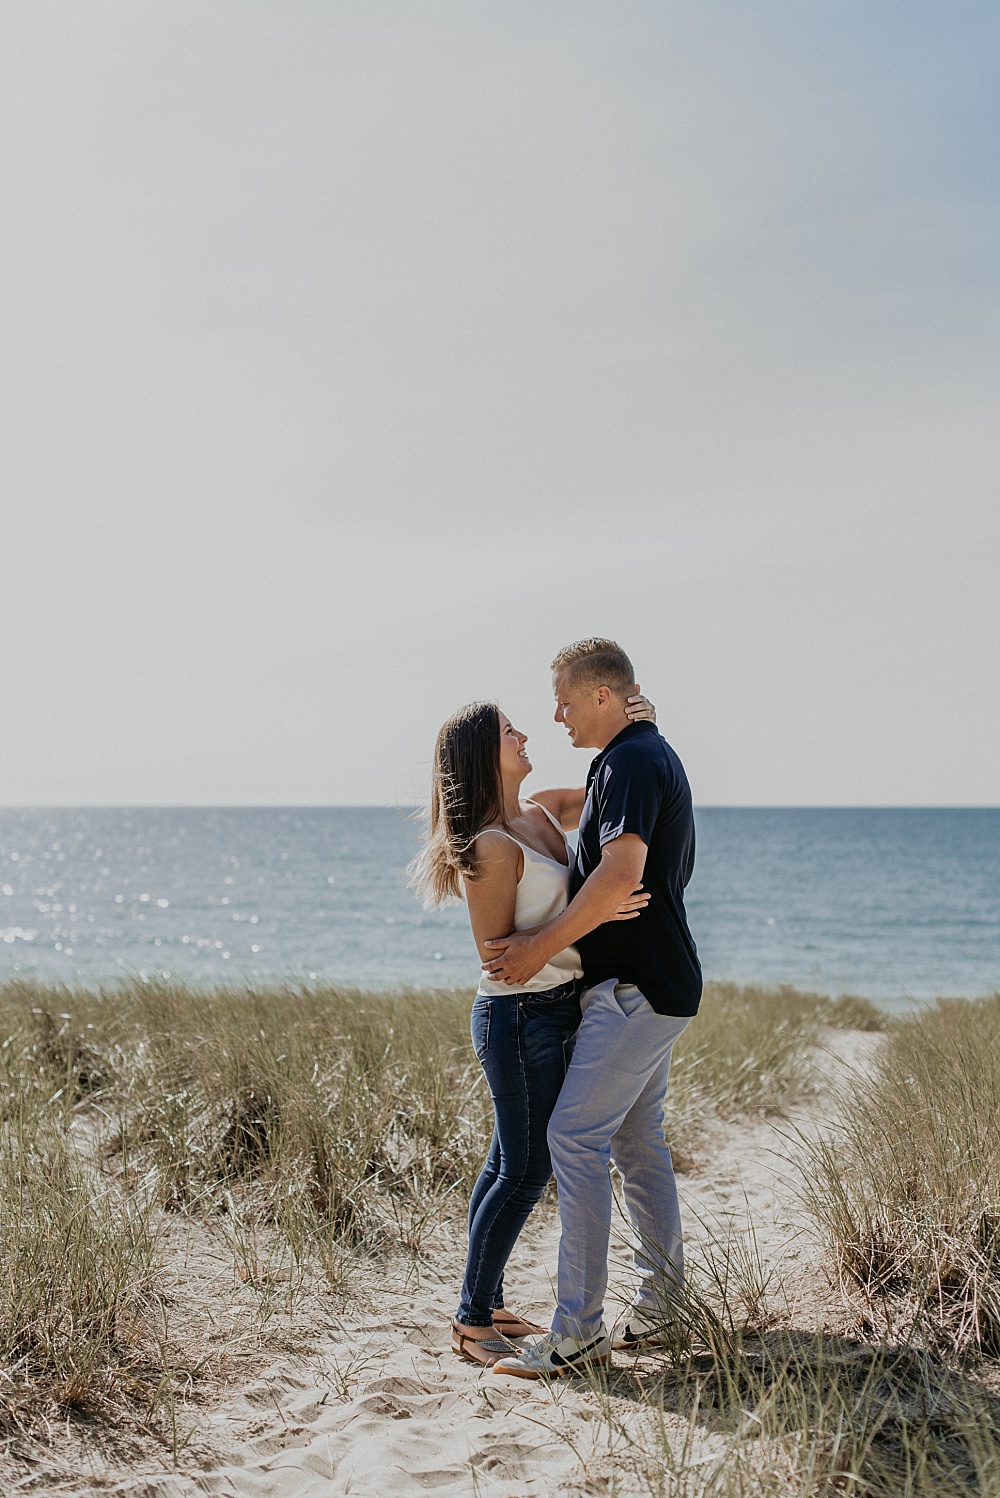 Engaged couple on the beach of Lake Michigan embracing while smiling at each other lovingly.